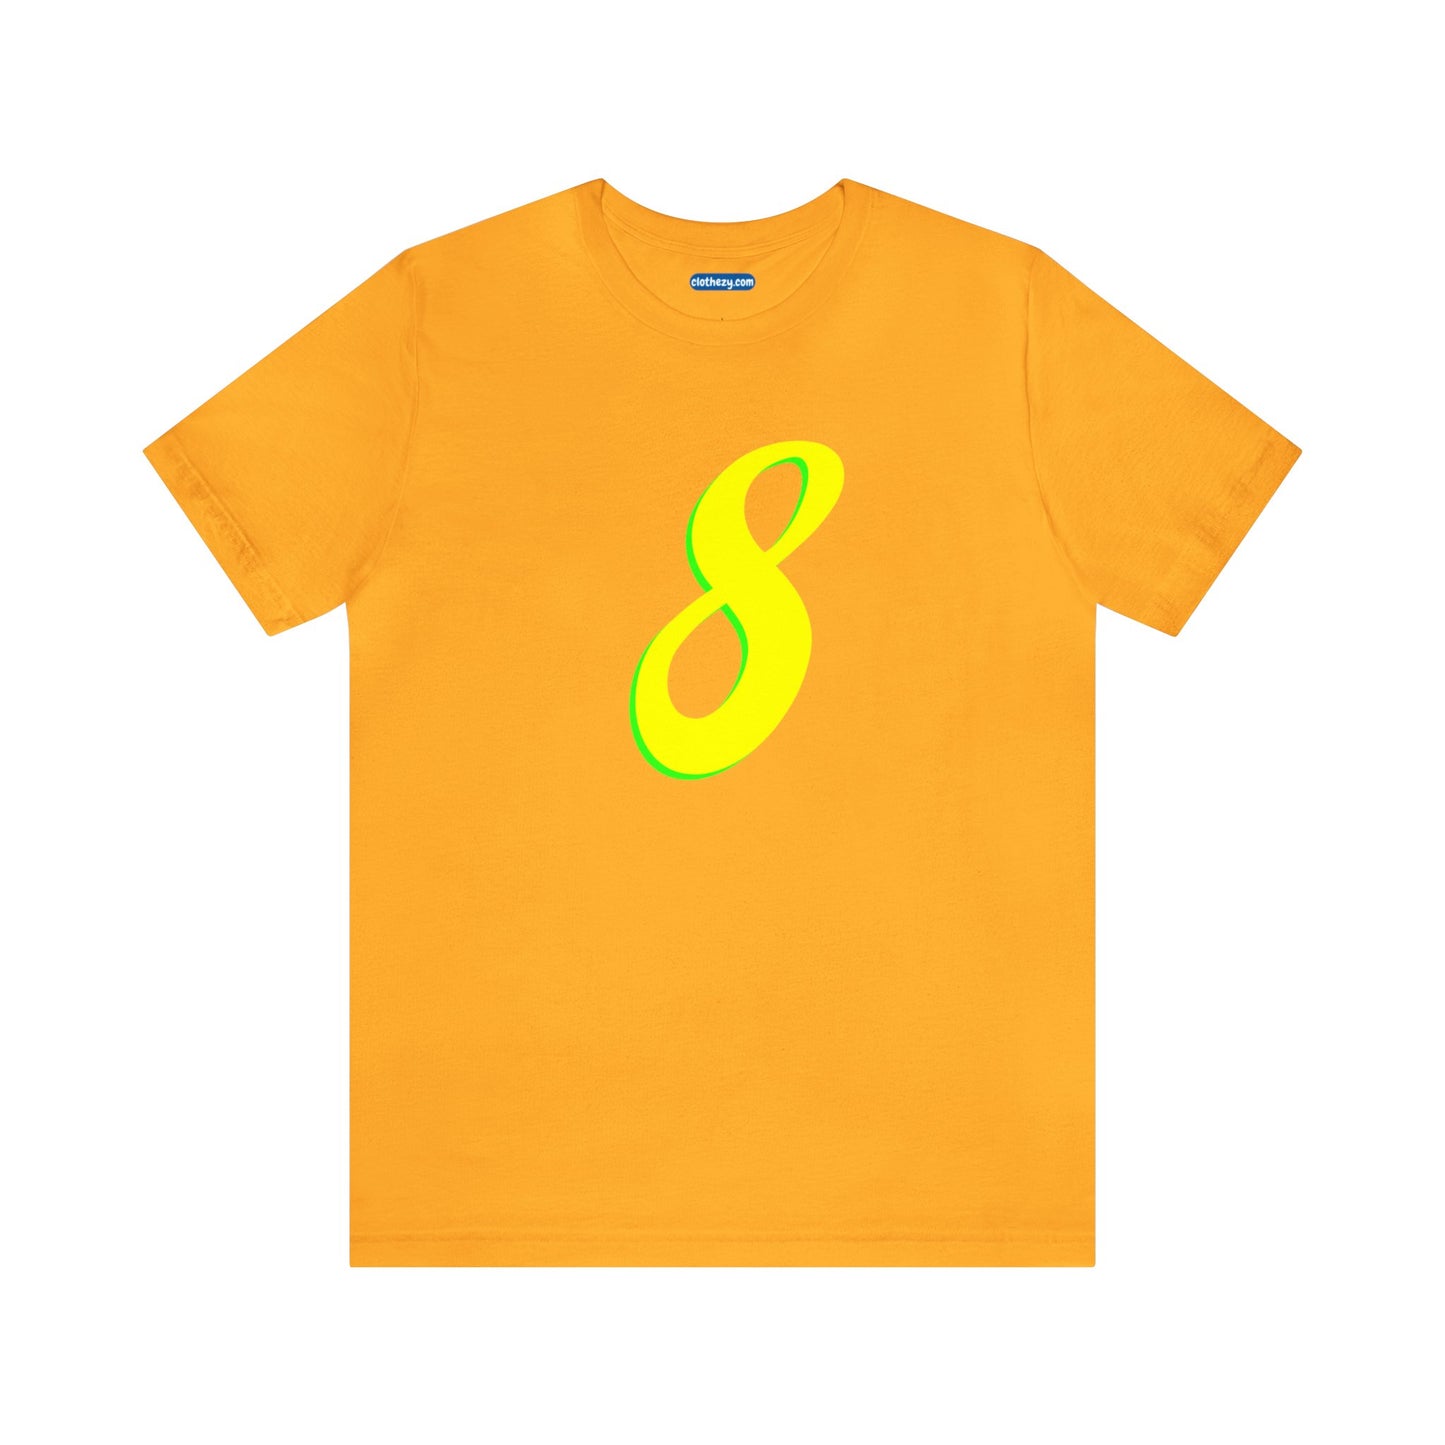 Number 8 Design - Soft Cotton Tee for birthdays and celebrations, Gift for friends and family, Multiple Options by clothezy.com in Green Heather Size Small - Buy Now